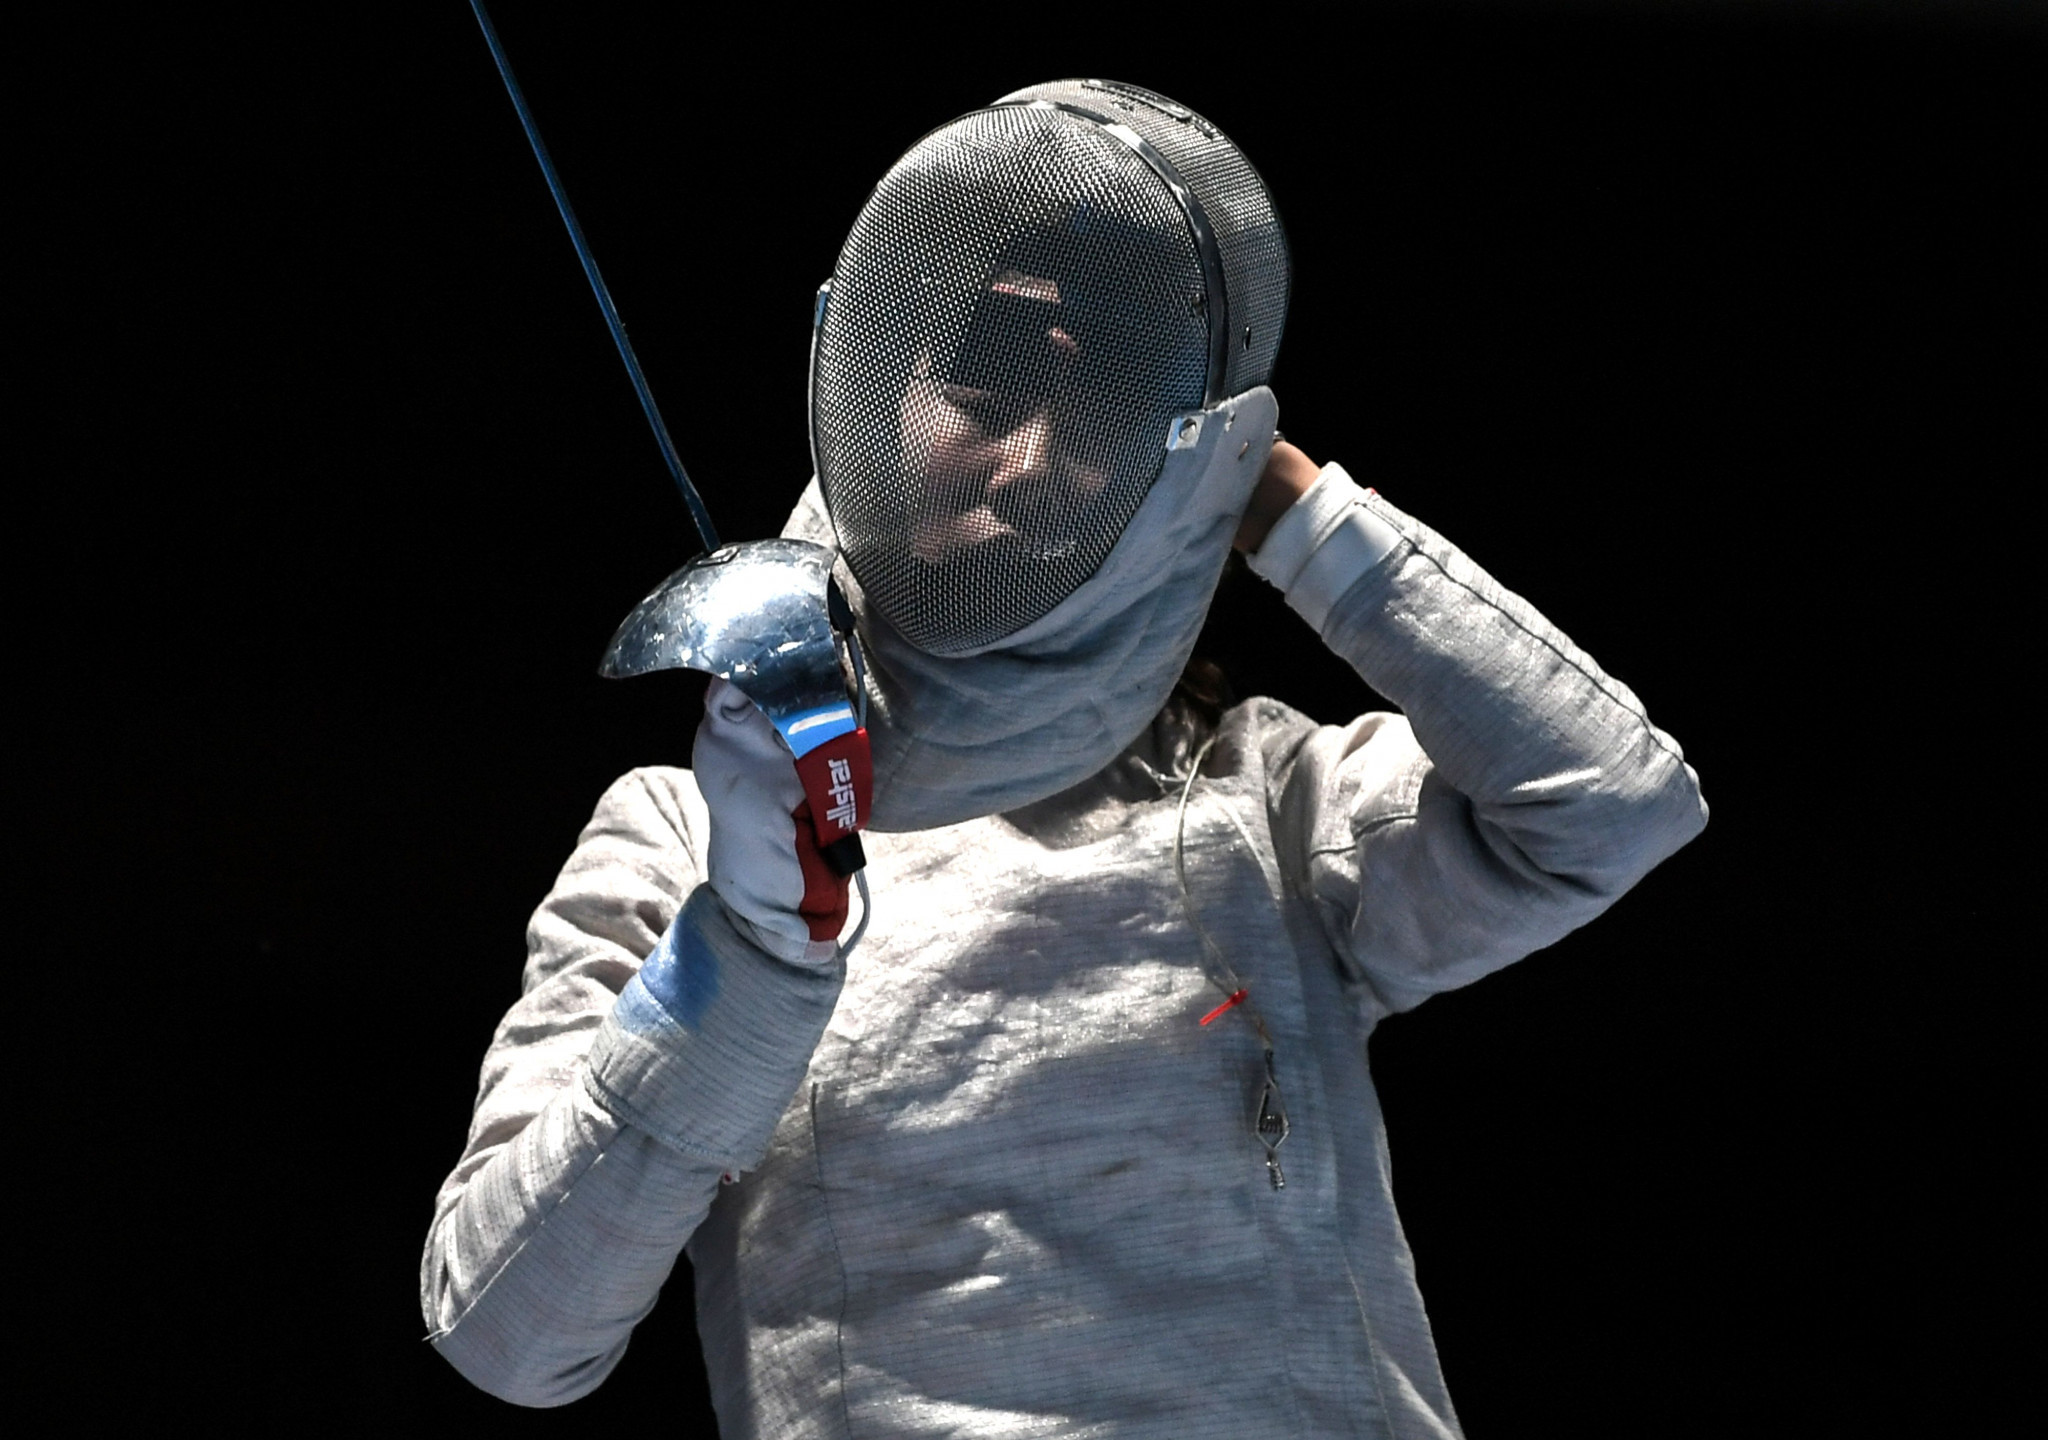 South Korea's London 2012 Olympic champion Kim Ji-yeon is defending her title in the women's sabre at the Asian Fencing Championships ©Getty Images